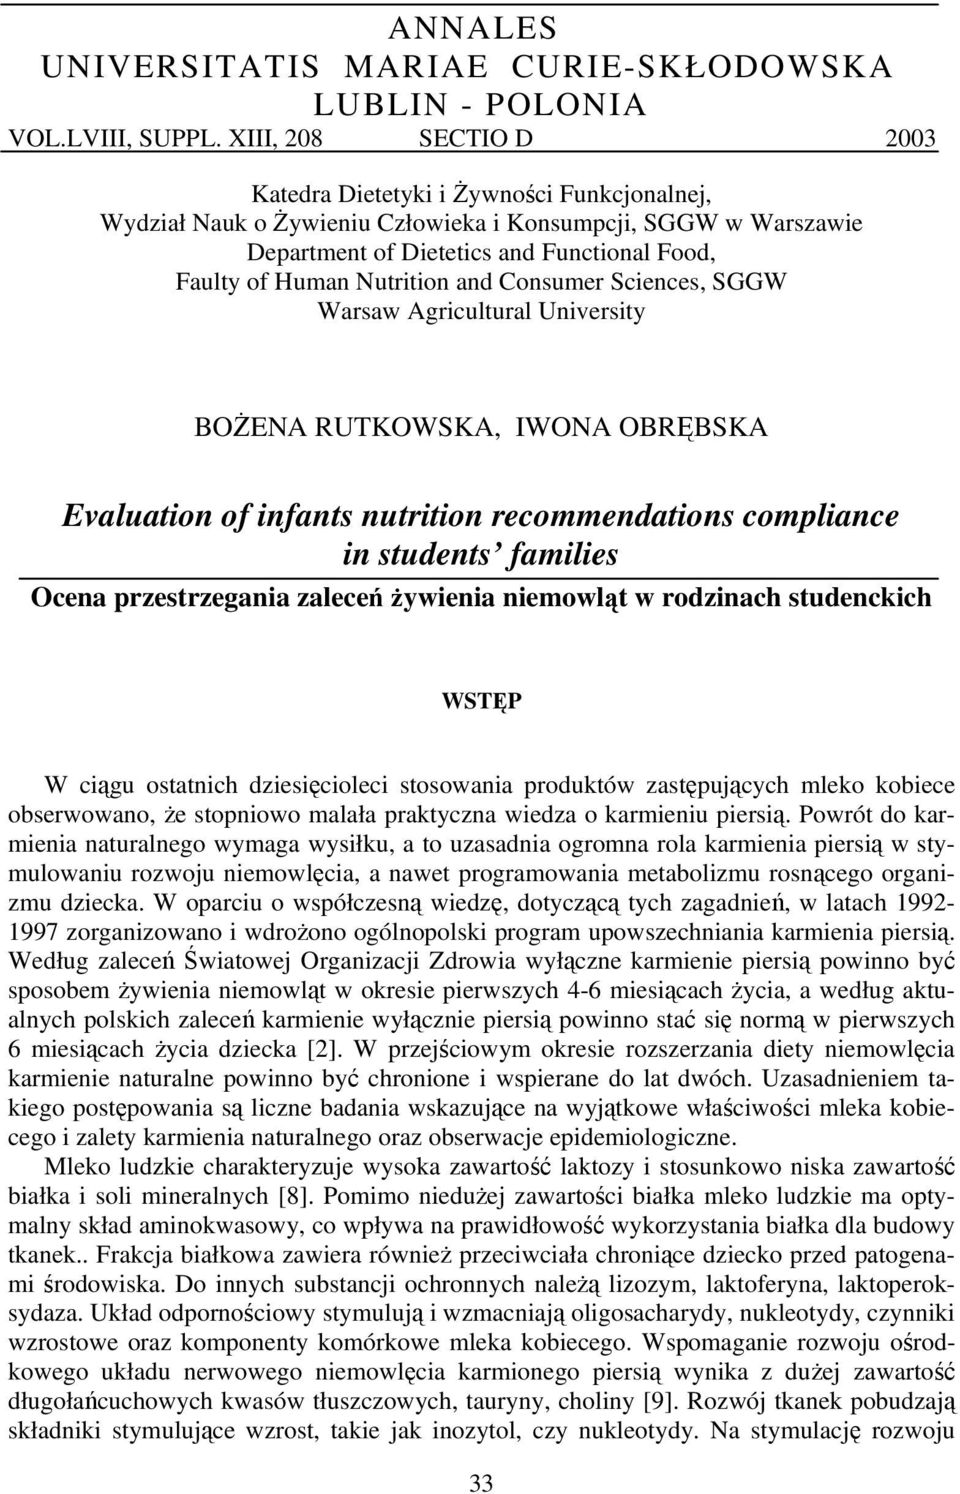 Nutrition and Consumer Sciences, SGGW Warsaw Agricultural University BOŻENA RUTKOWSKA, IWONA OBRĘBSKA Evaluation of infants nutrition recommendations compliance in students families Ocena